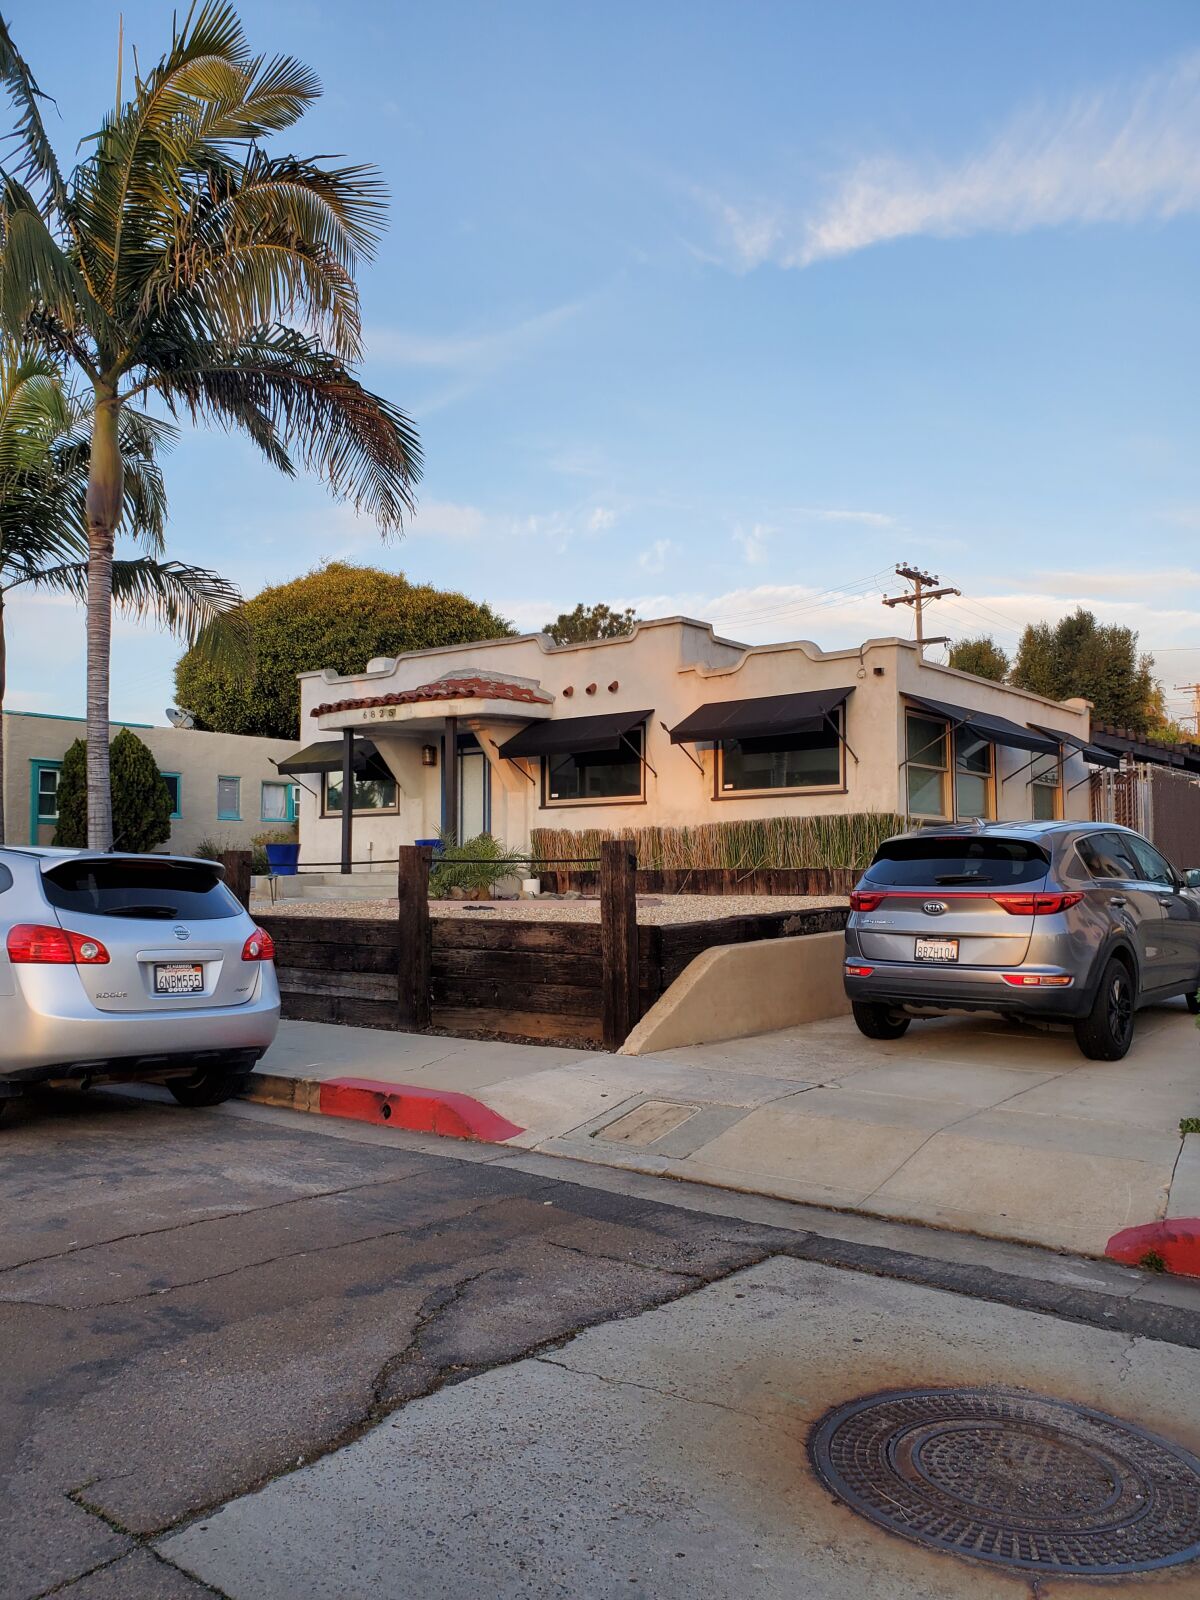 Plans call for a one-story home at 6825 La Jolla Blvd. to be converted to multiple units.